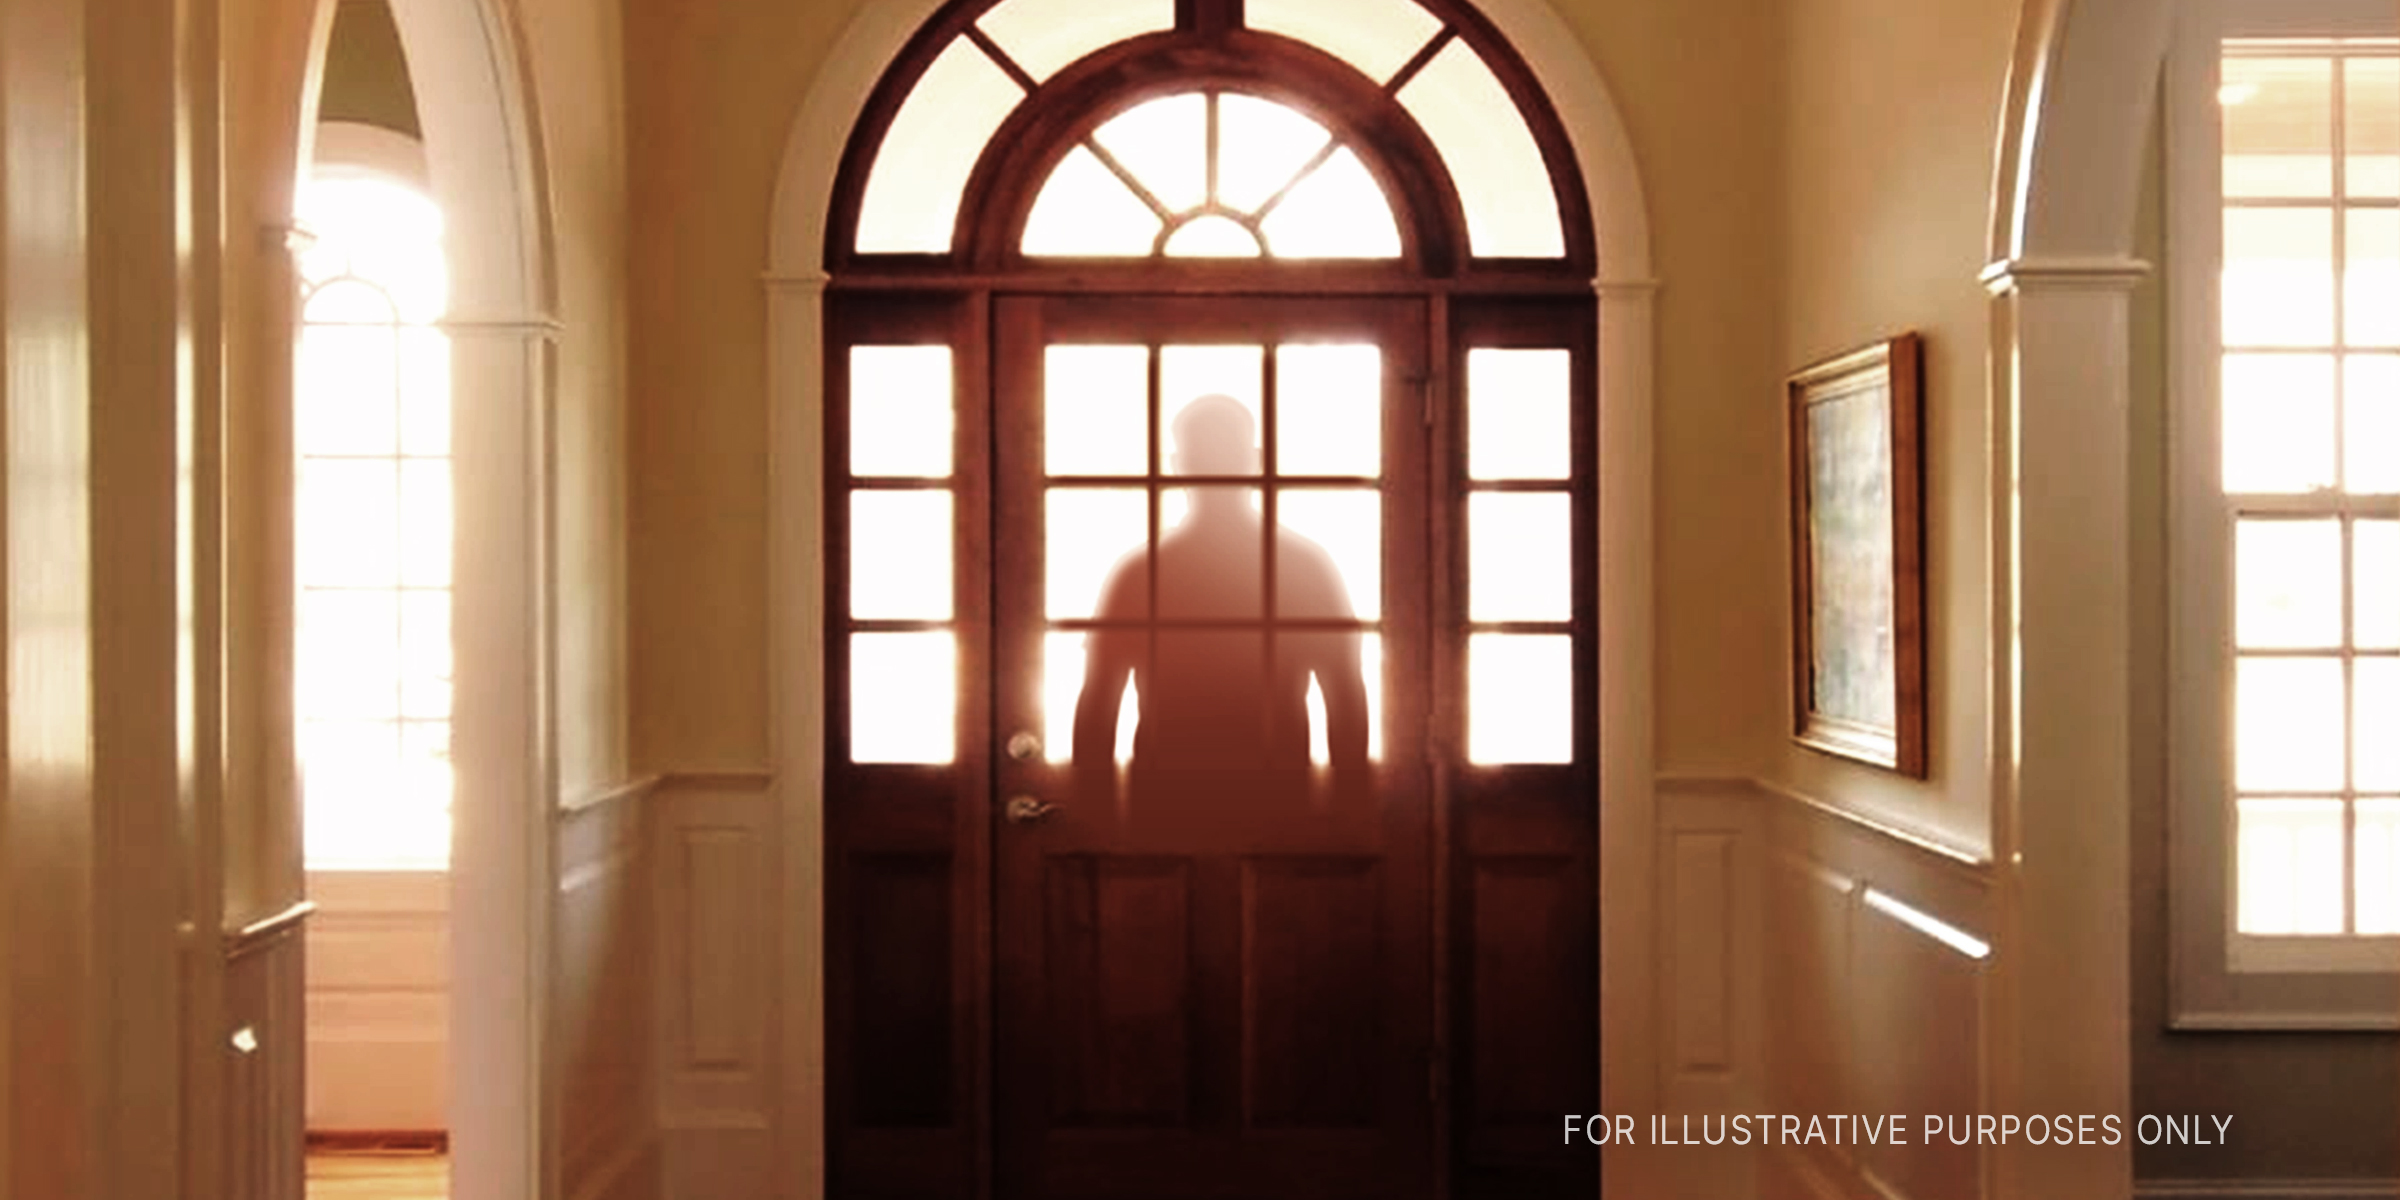 A man's silhouette at a glass-paneled door | Source: Getty Images